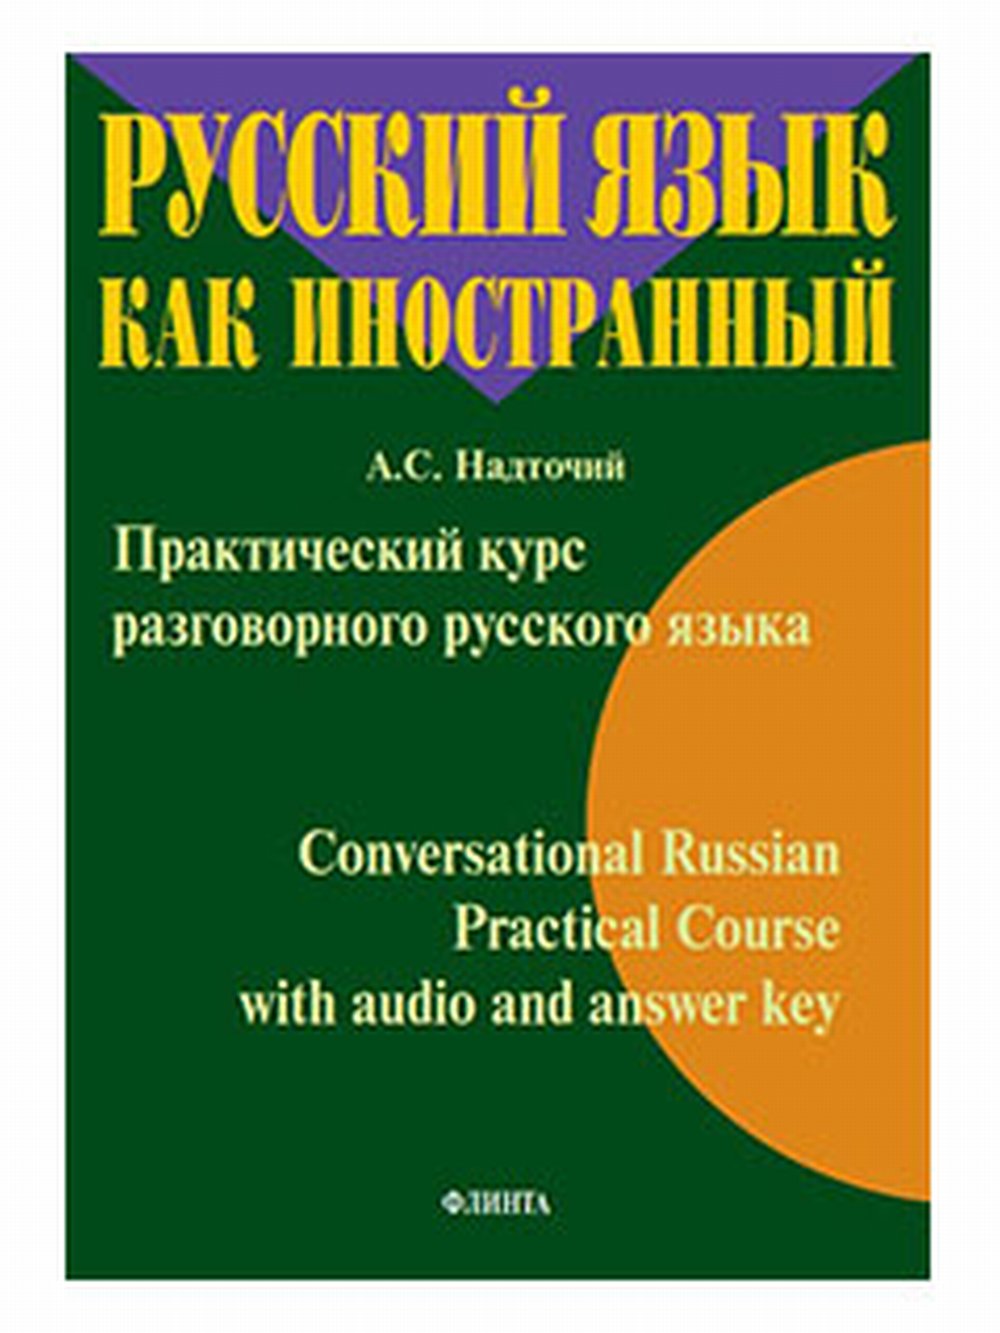     . (Conversational Russian Practical Course for Total Beginners with audio and answer key)